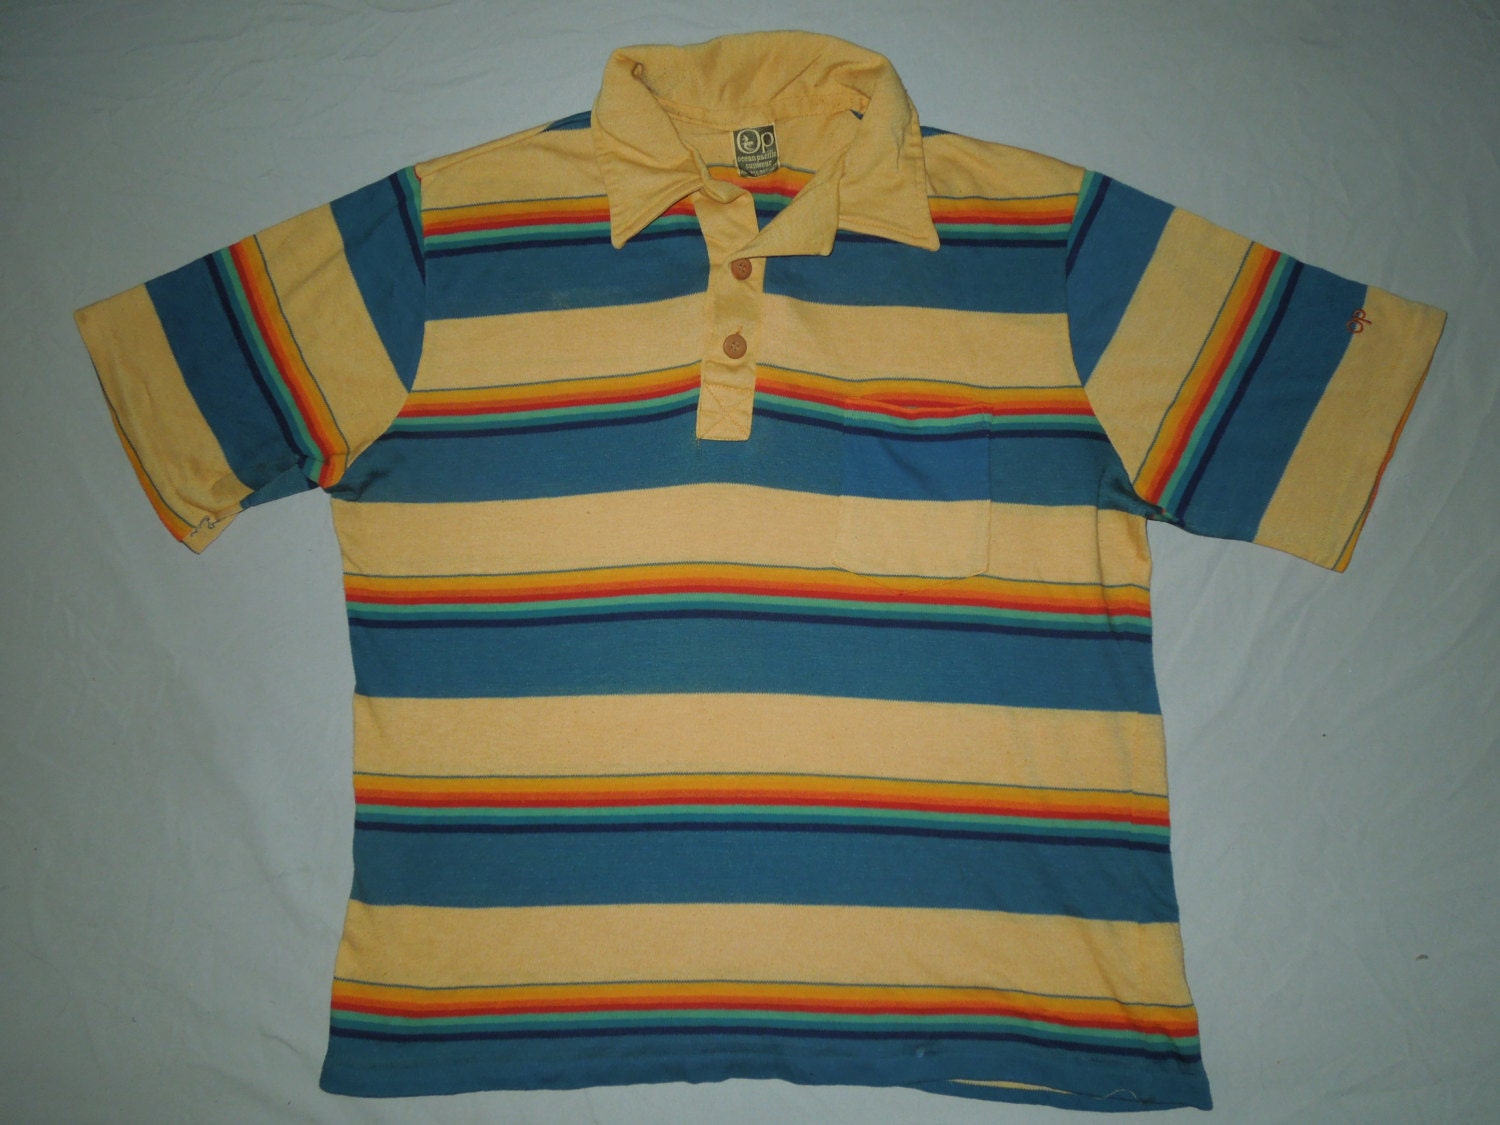 Vintage 80's Op Ocean Pacific Cotton Polo Shirt Size by LzVintage